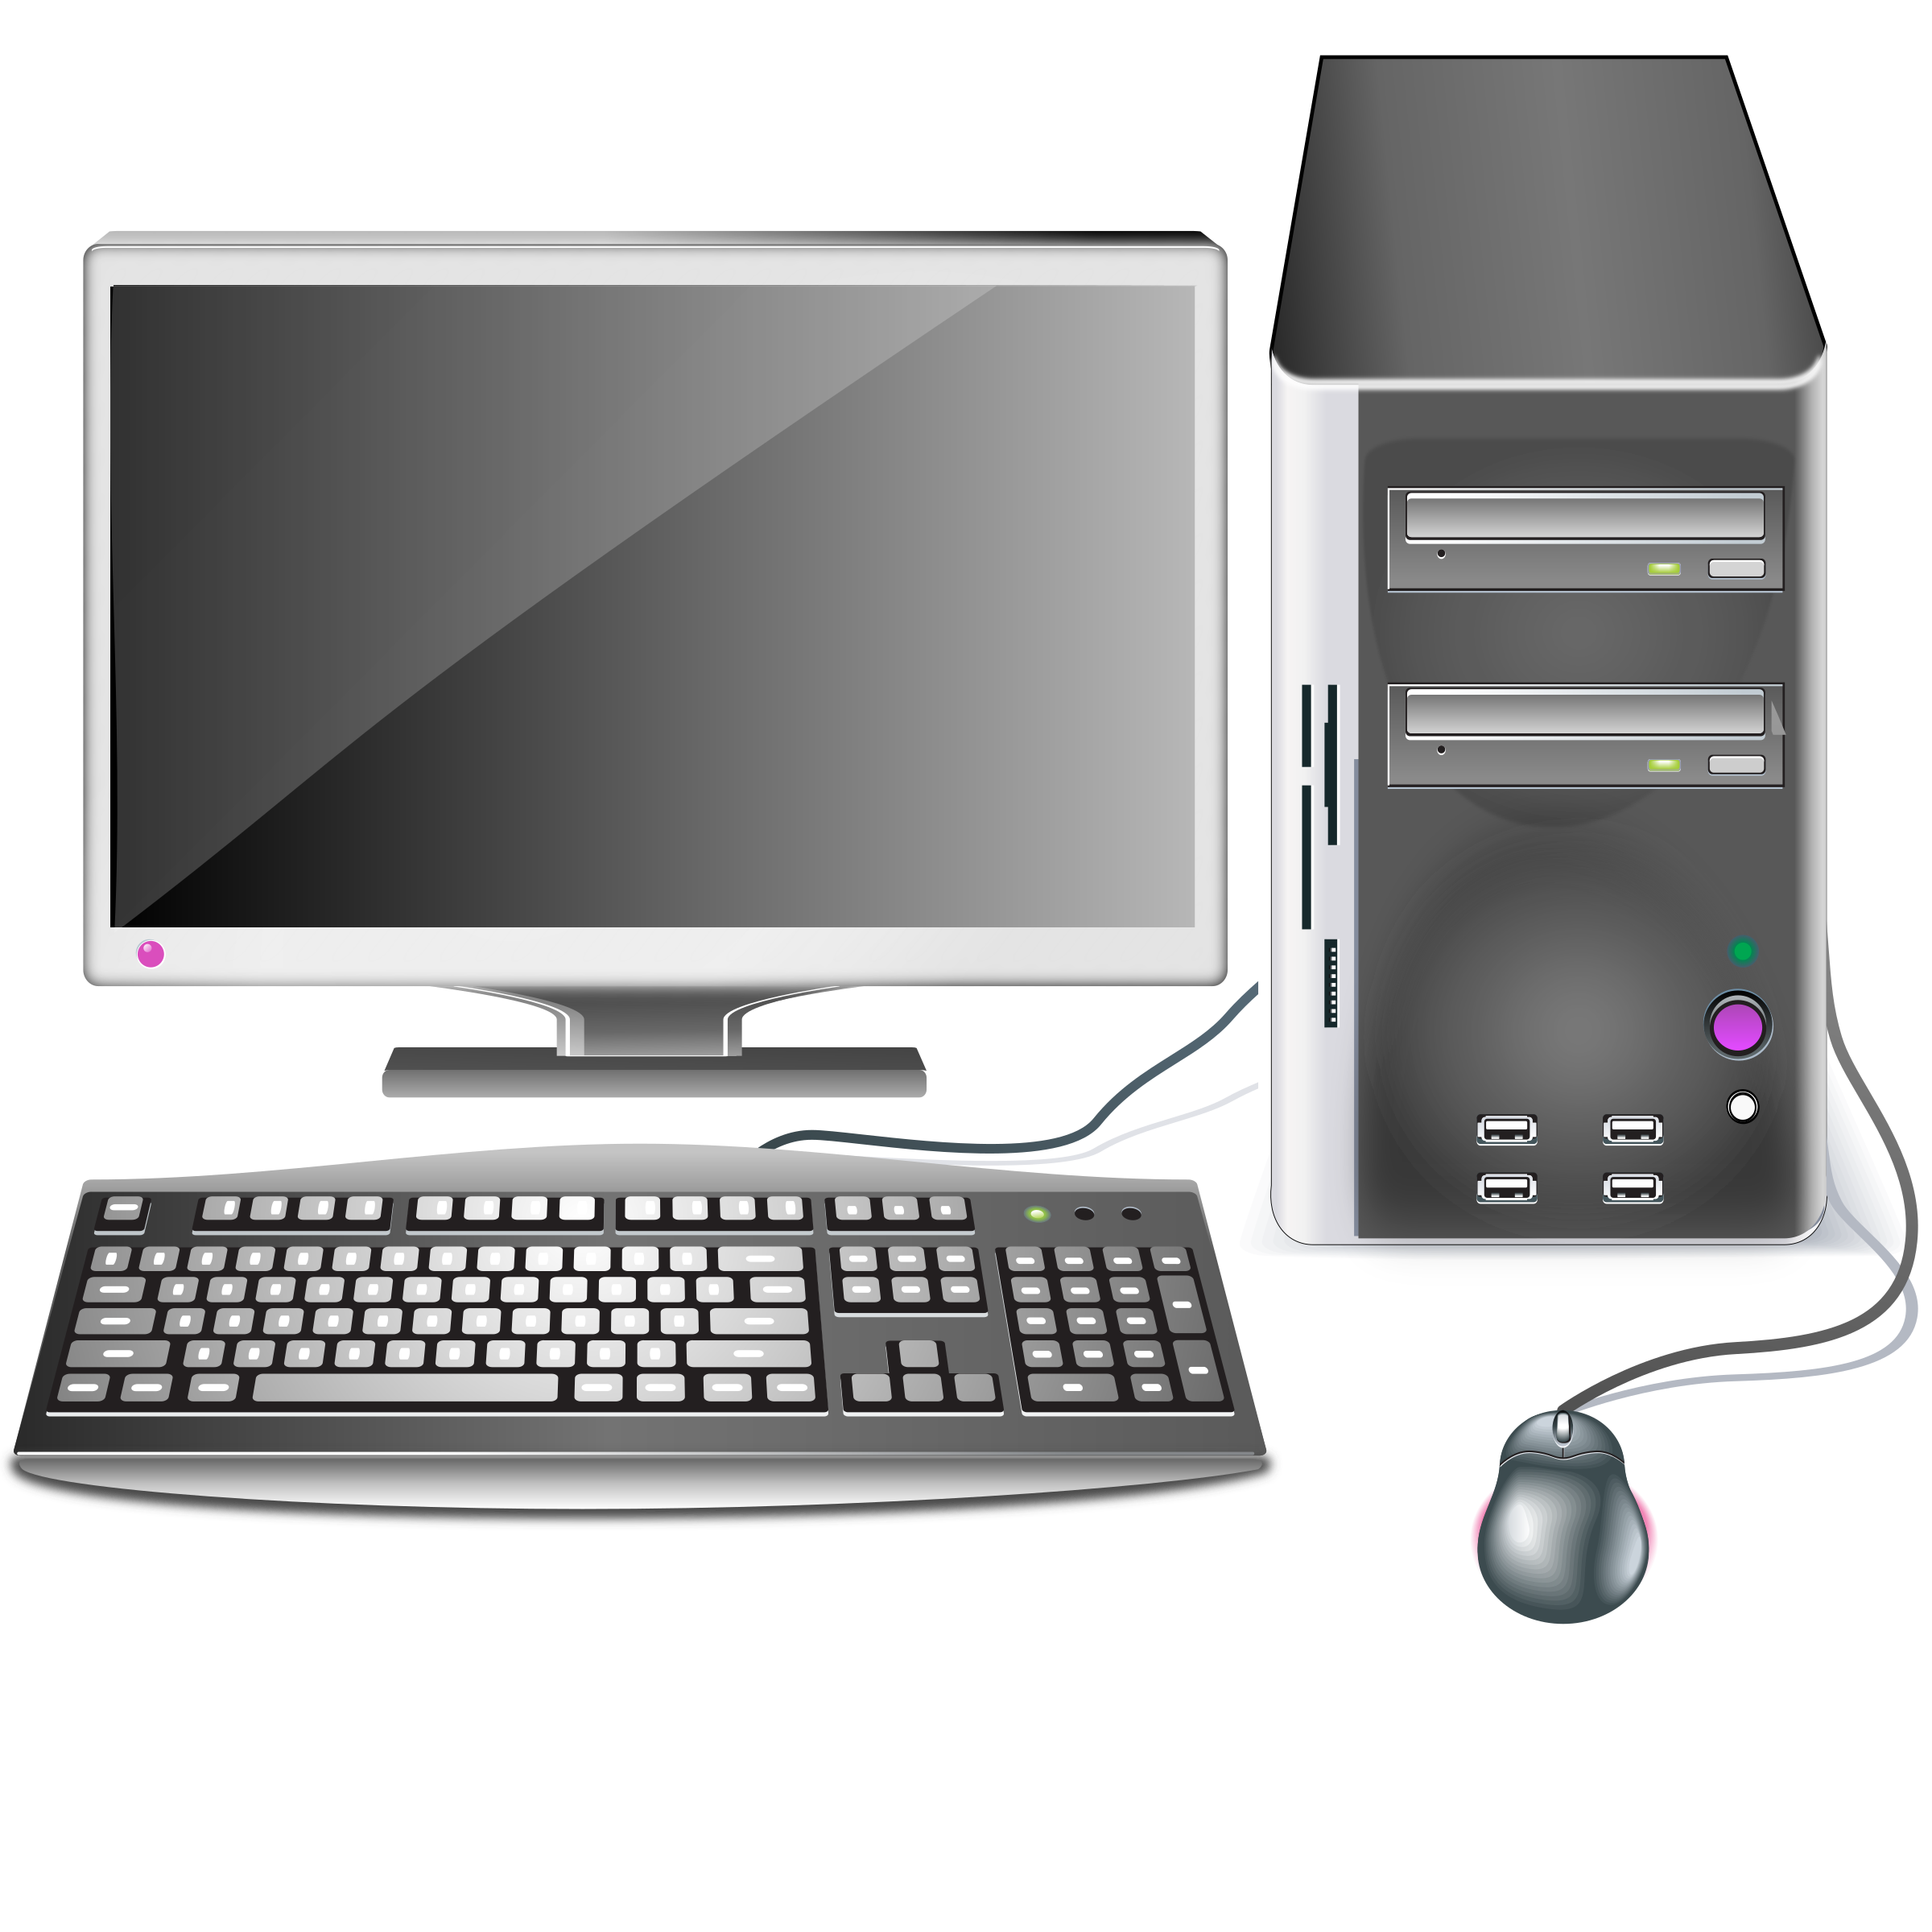 Clipart computer ict. Station big image png